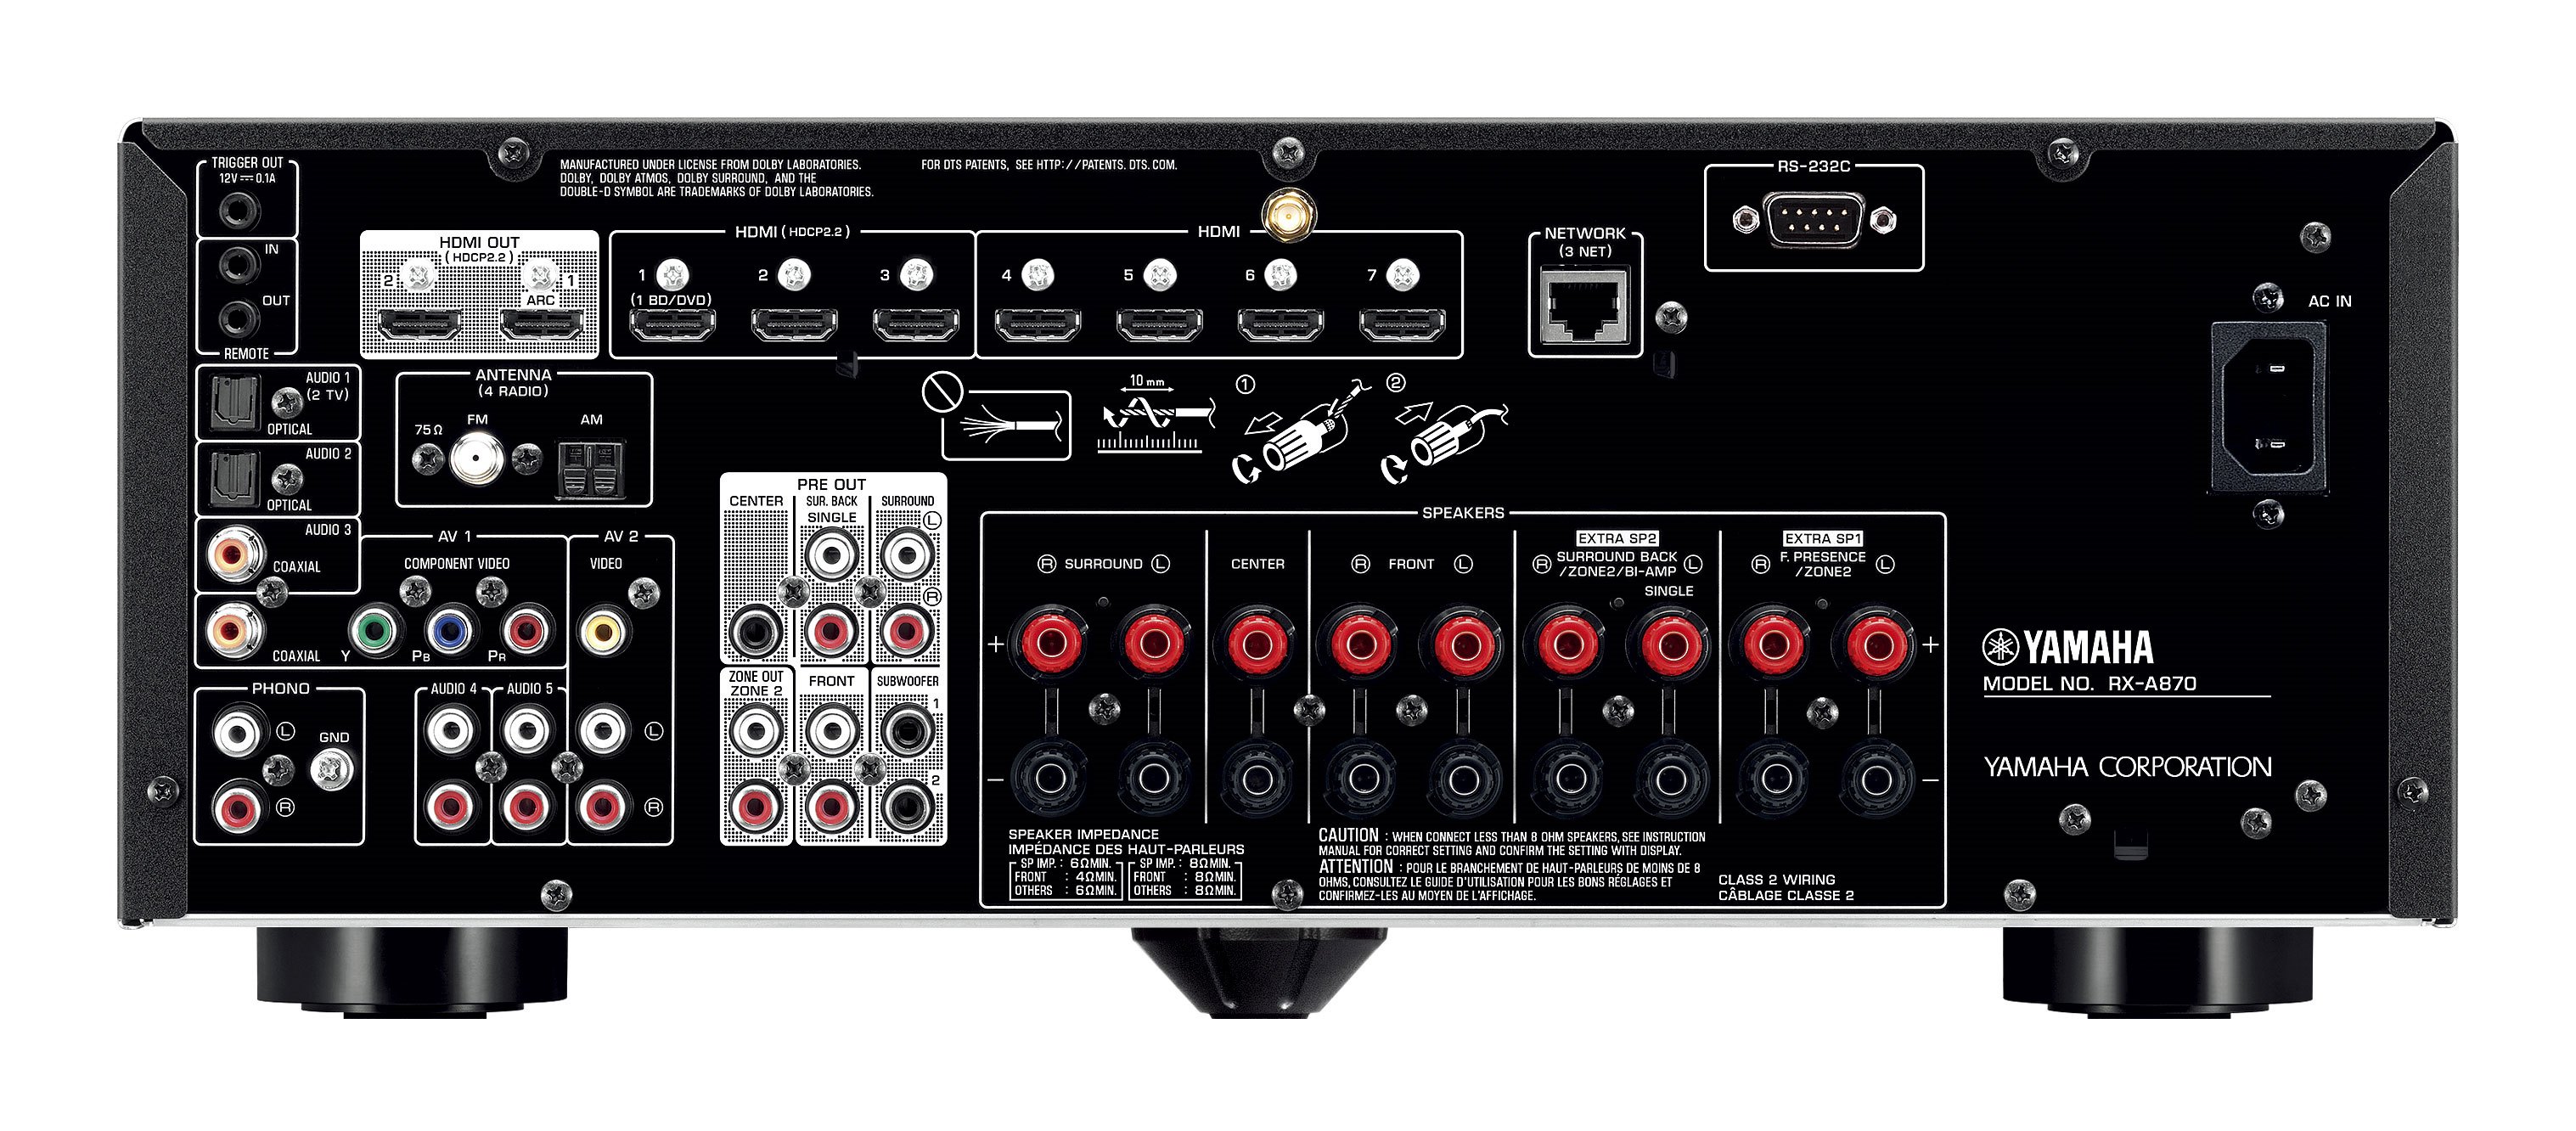 RX-A870 - Specs - AV Receivers - Audio & Visual - Products